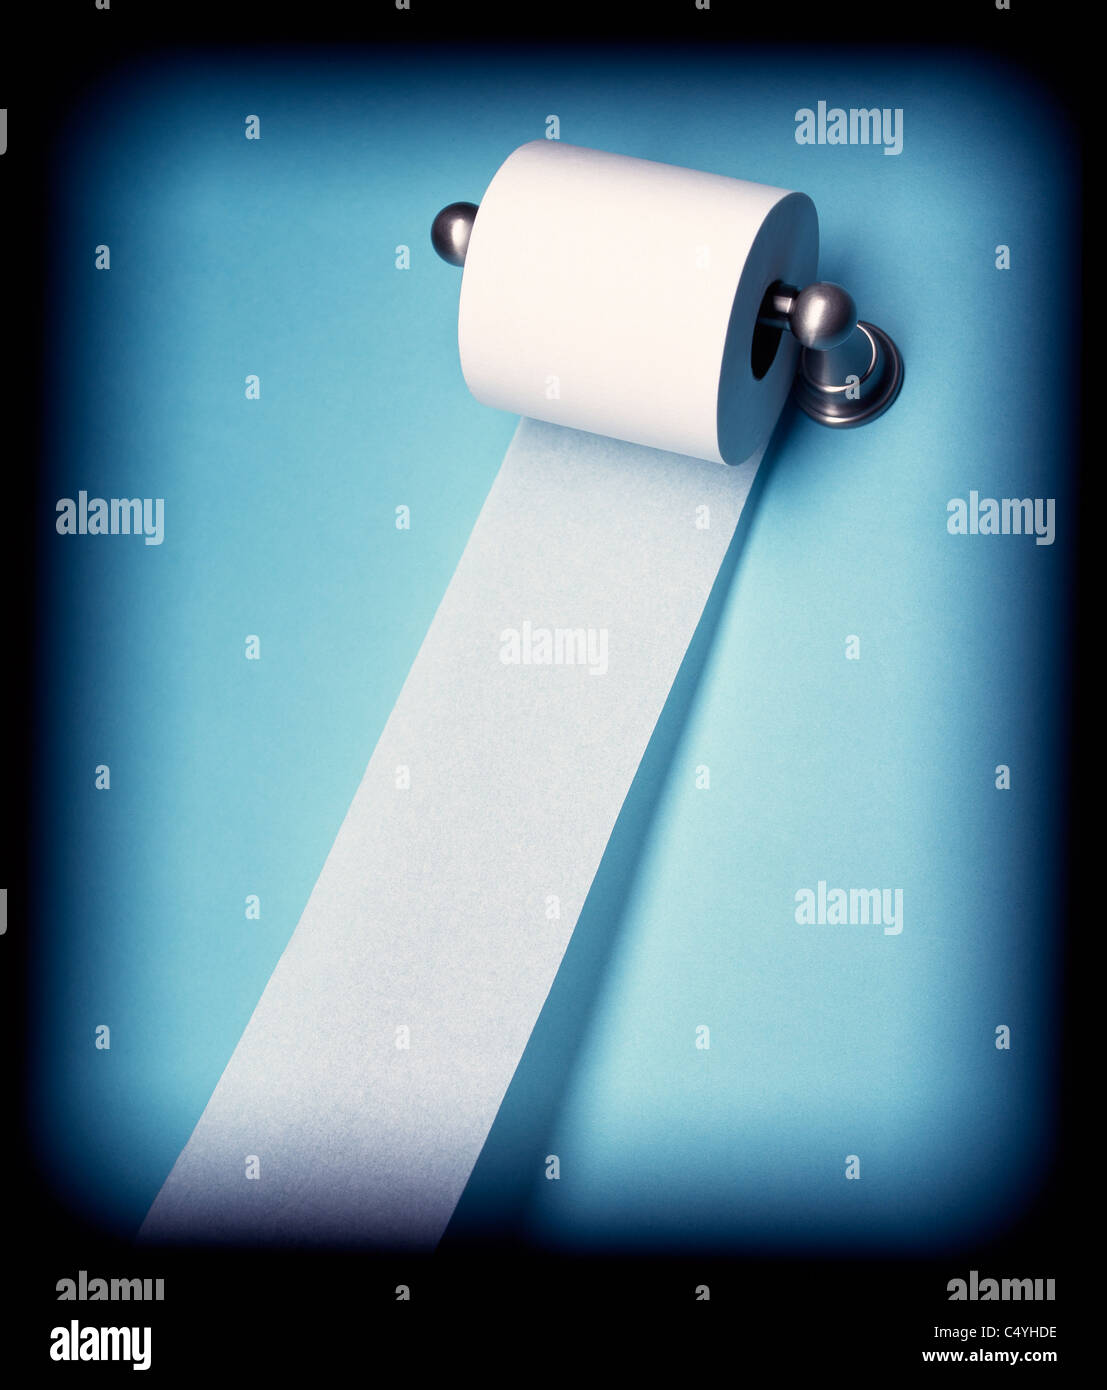 A toilet paper holder with paper rolling downwards Stock Photo